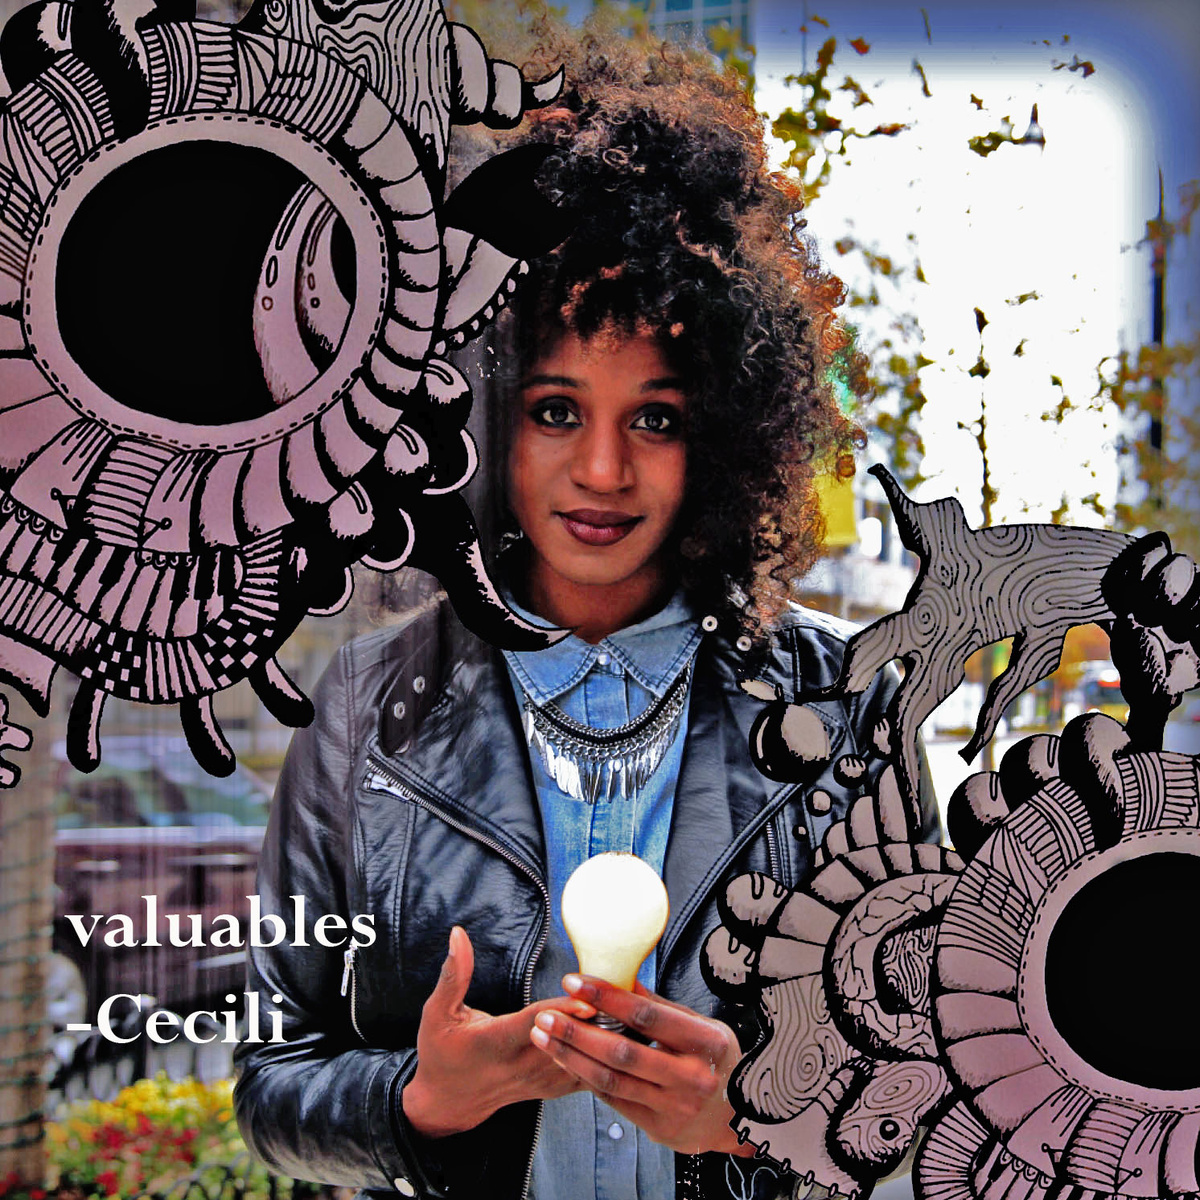 Cecili – “Valuables” Review